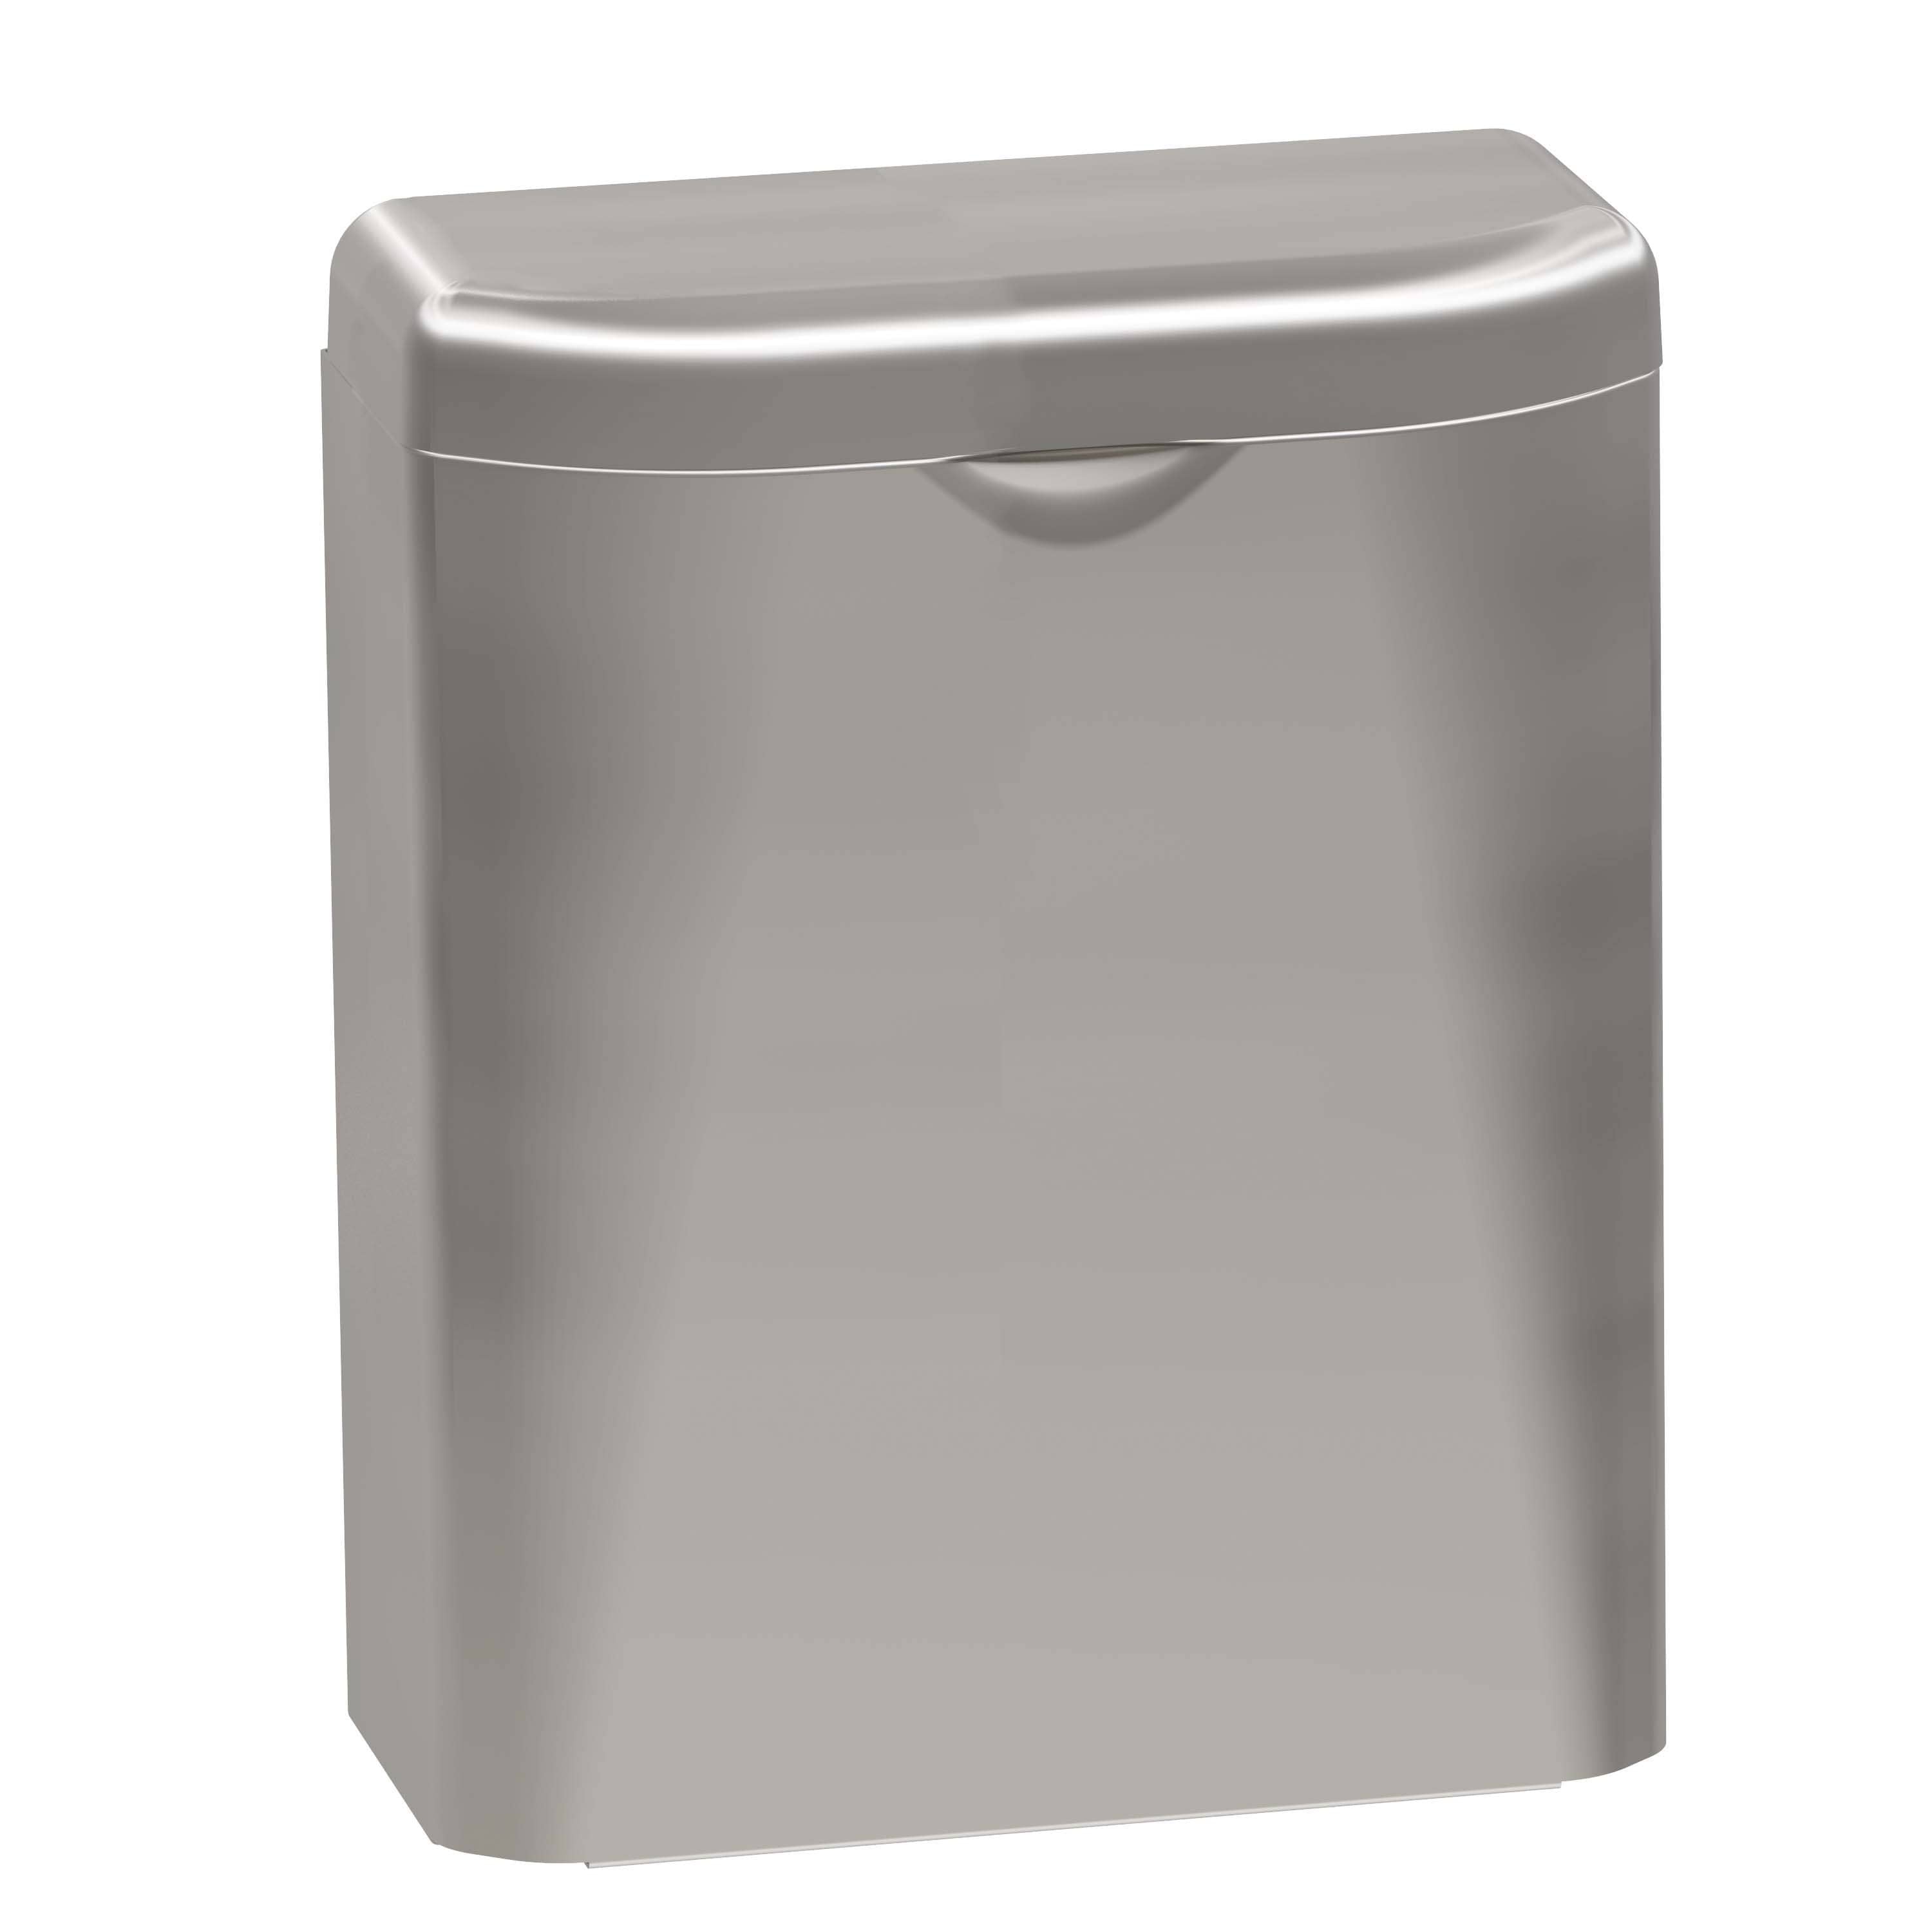 Bradley 4A10-11 Commercial Restroom Sanitary Napkin Disposal, Surface-Mounted, Stainless Steel - TotalRestroom.com